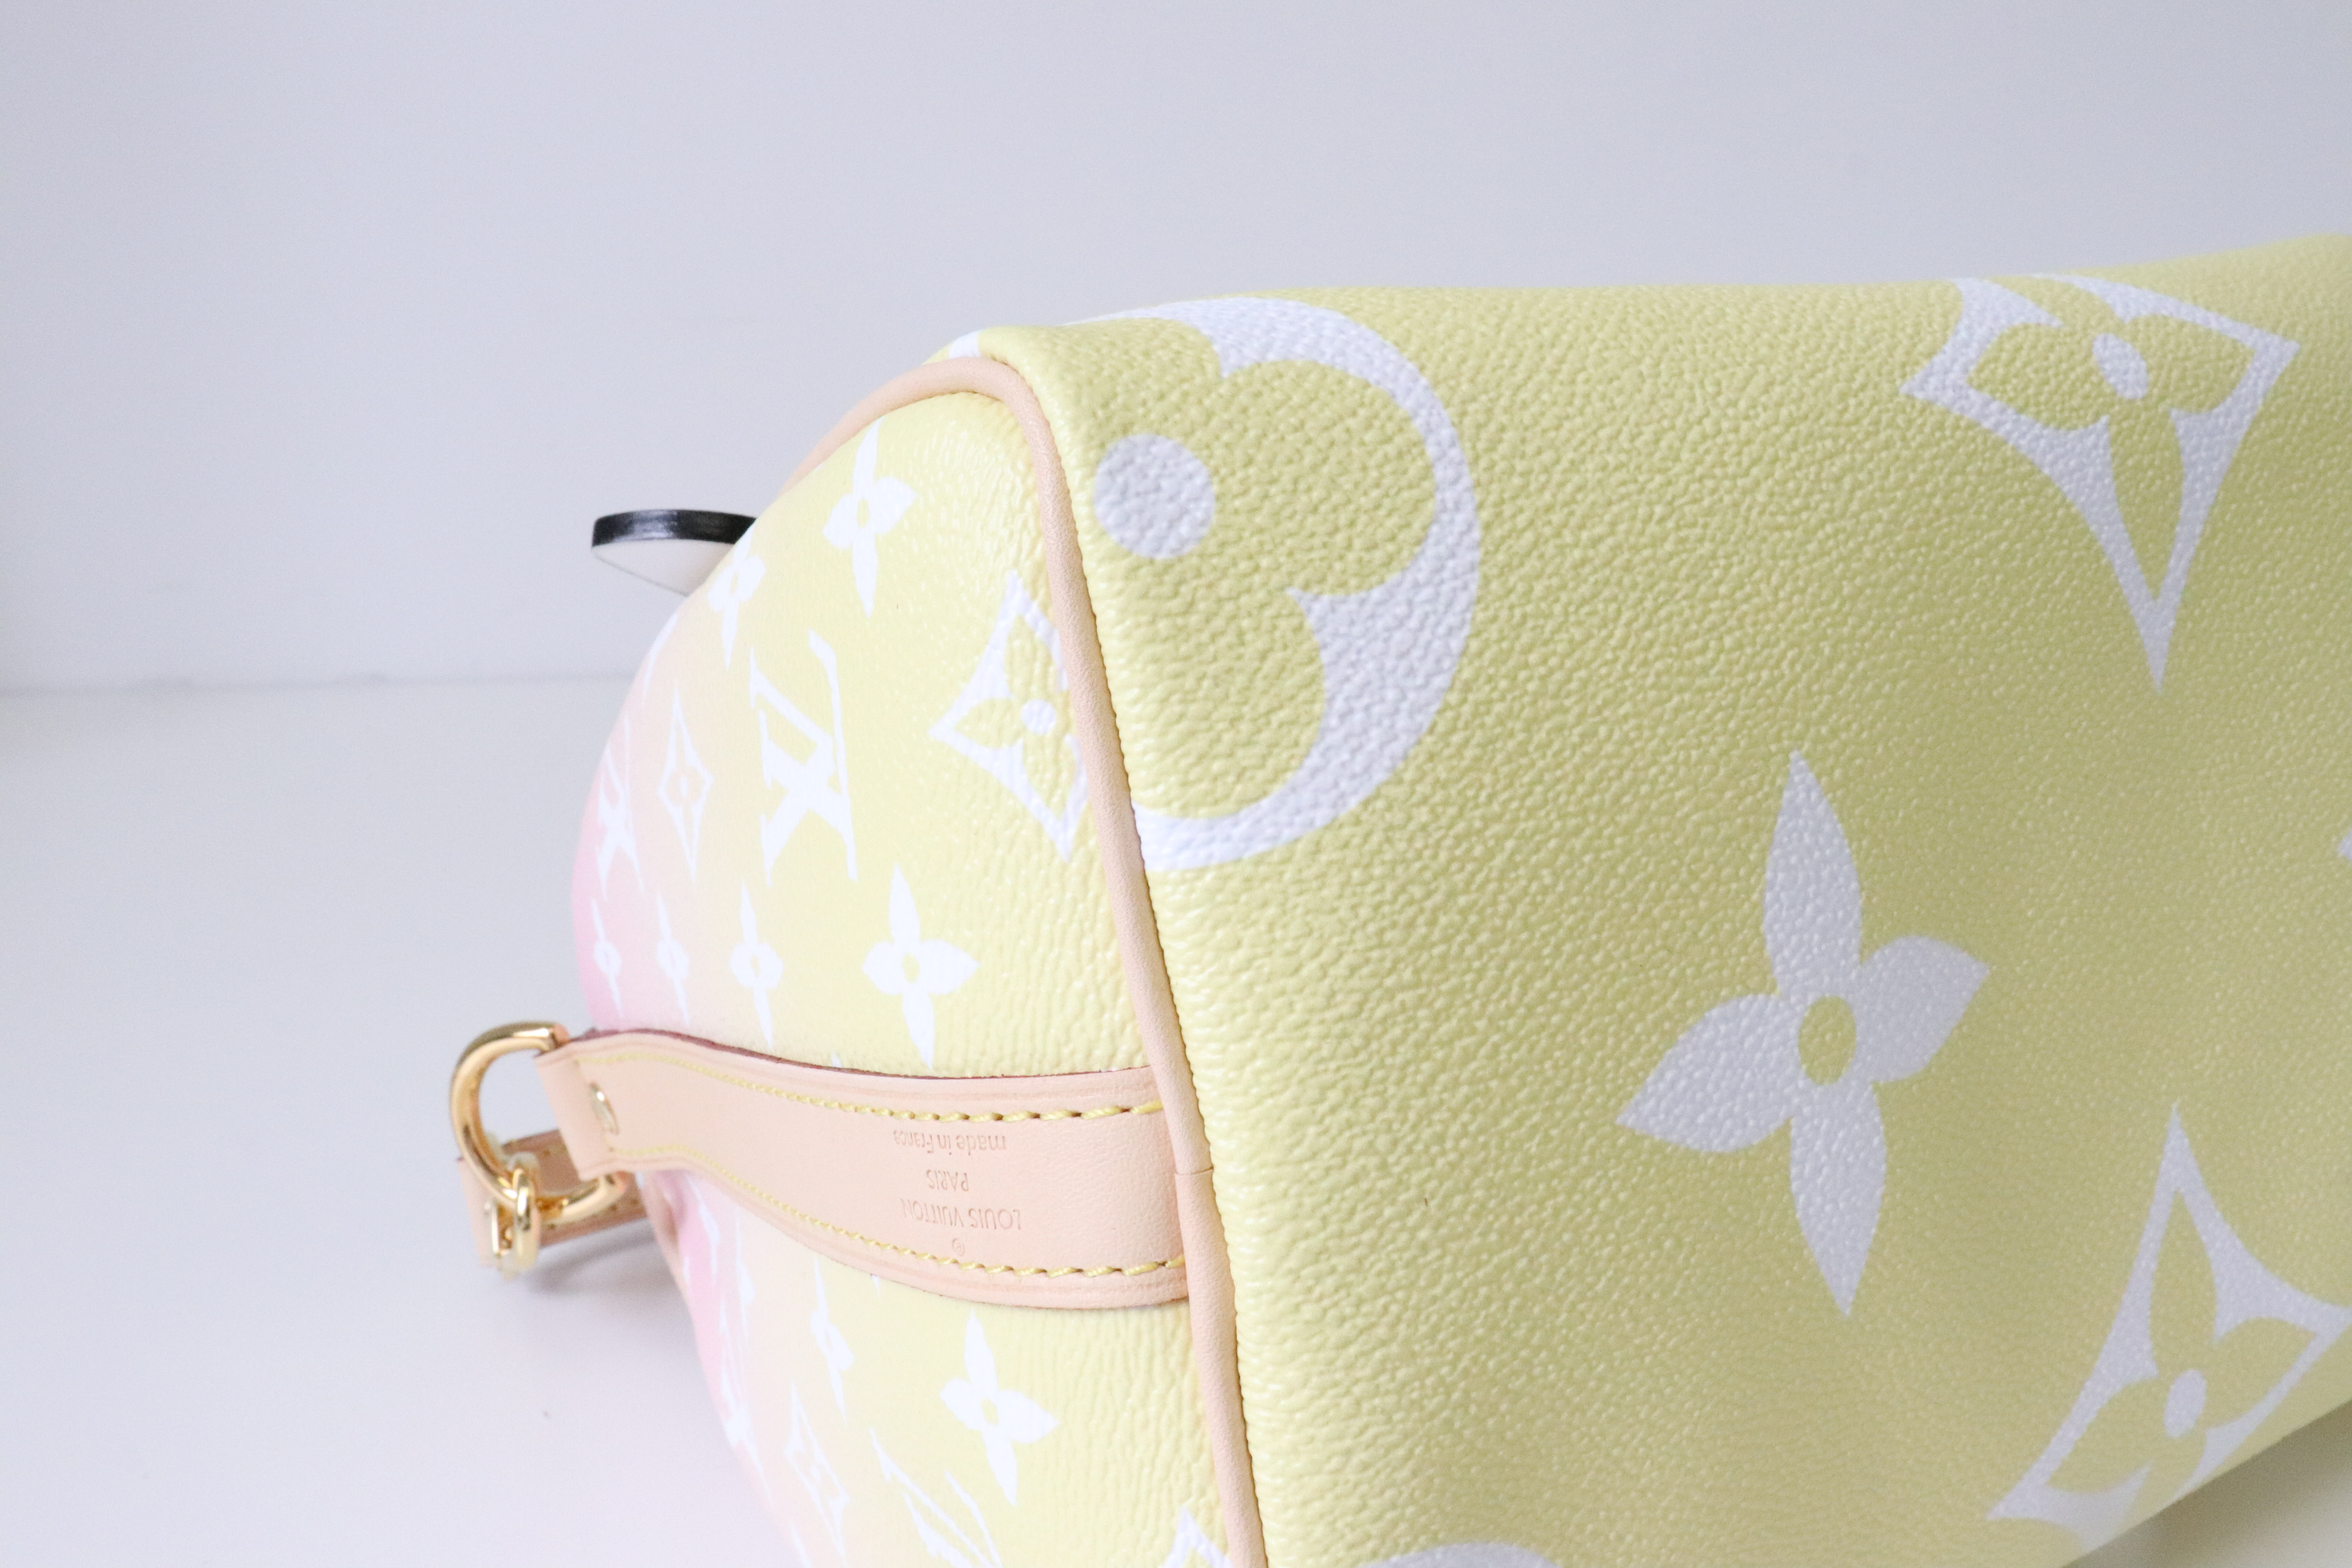 Louis Vuitton, Bags, Louis Vuitton By The Pool Speedy 25 Rose Pink Yellow  2 Charms Crossbody Conv Nwt